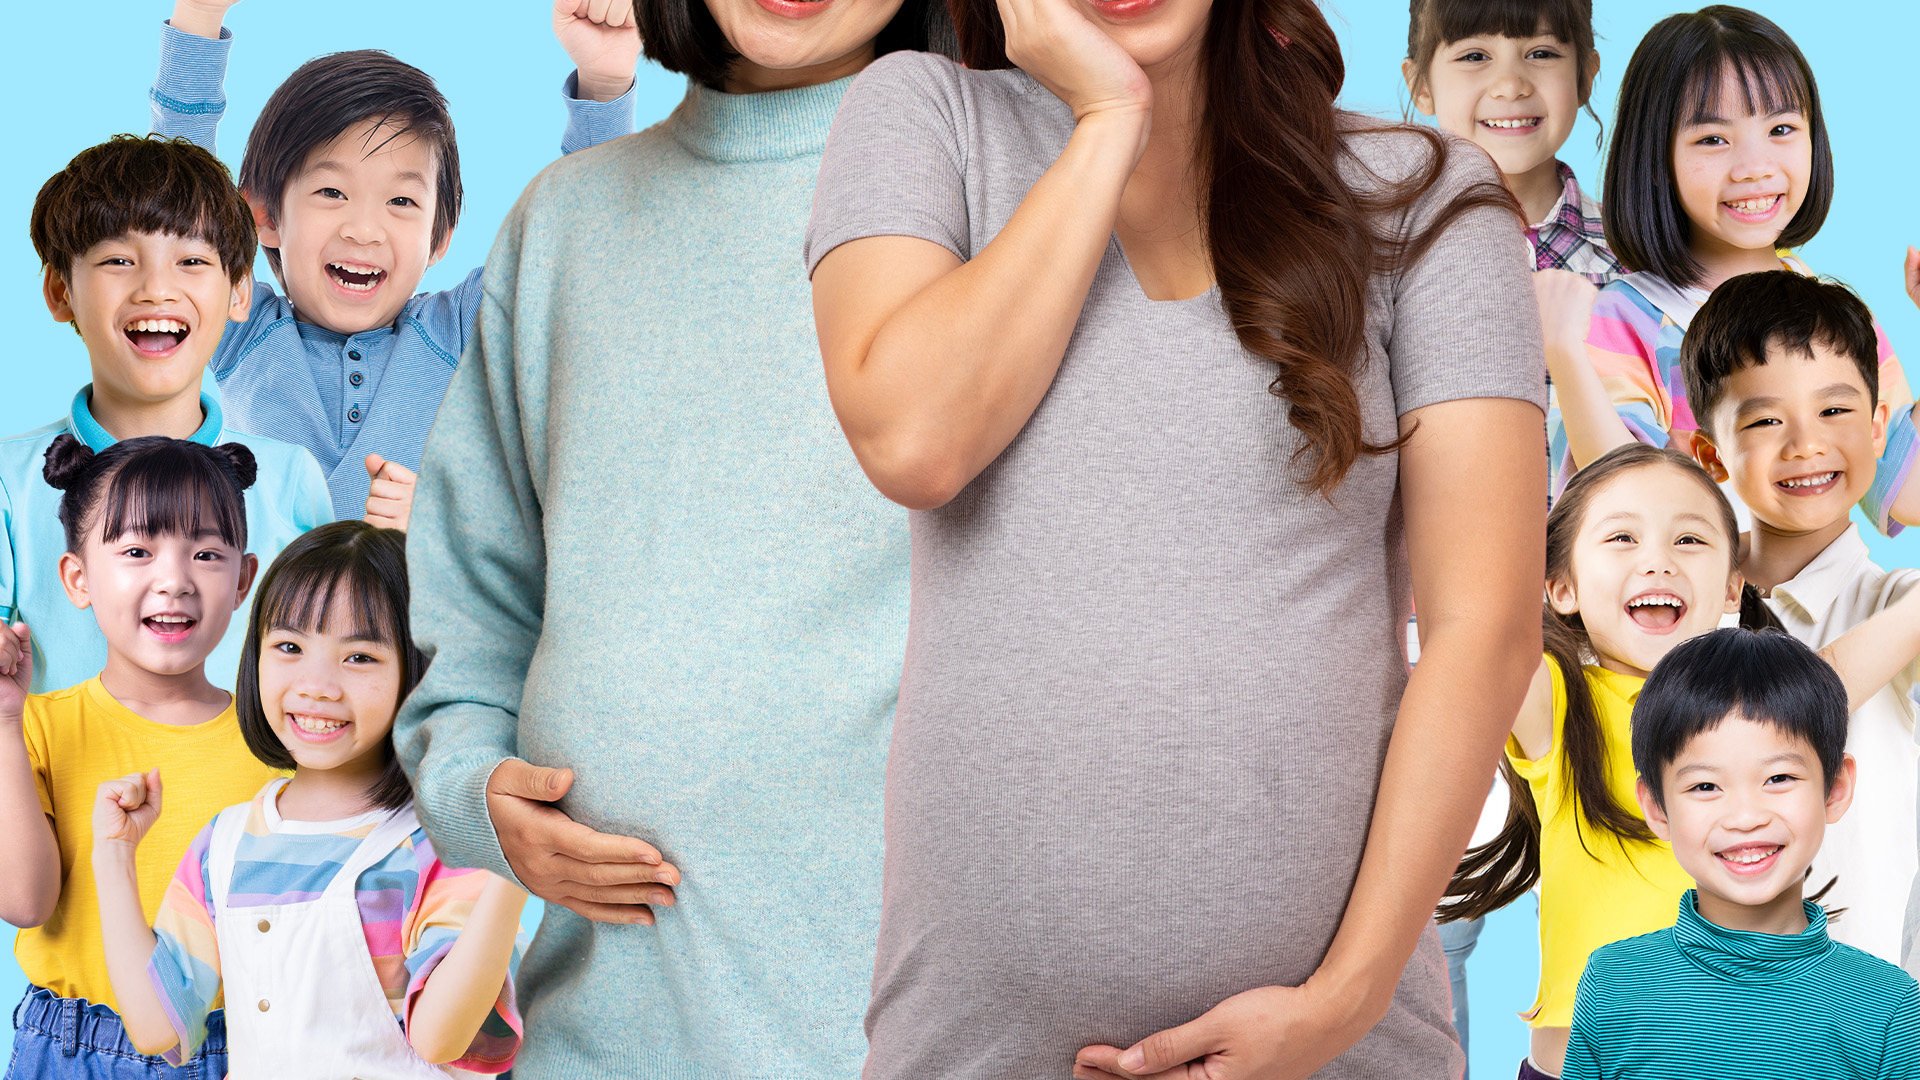 Two women in China have used their periods of pregnancy and breastfeeding to go on a shoplifting spree after discovering that mainland law exempts expectant mothers from going to jail. Photo: SCMP composite/Shutterstock